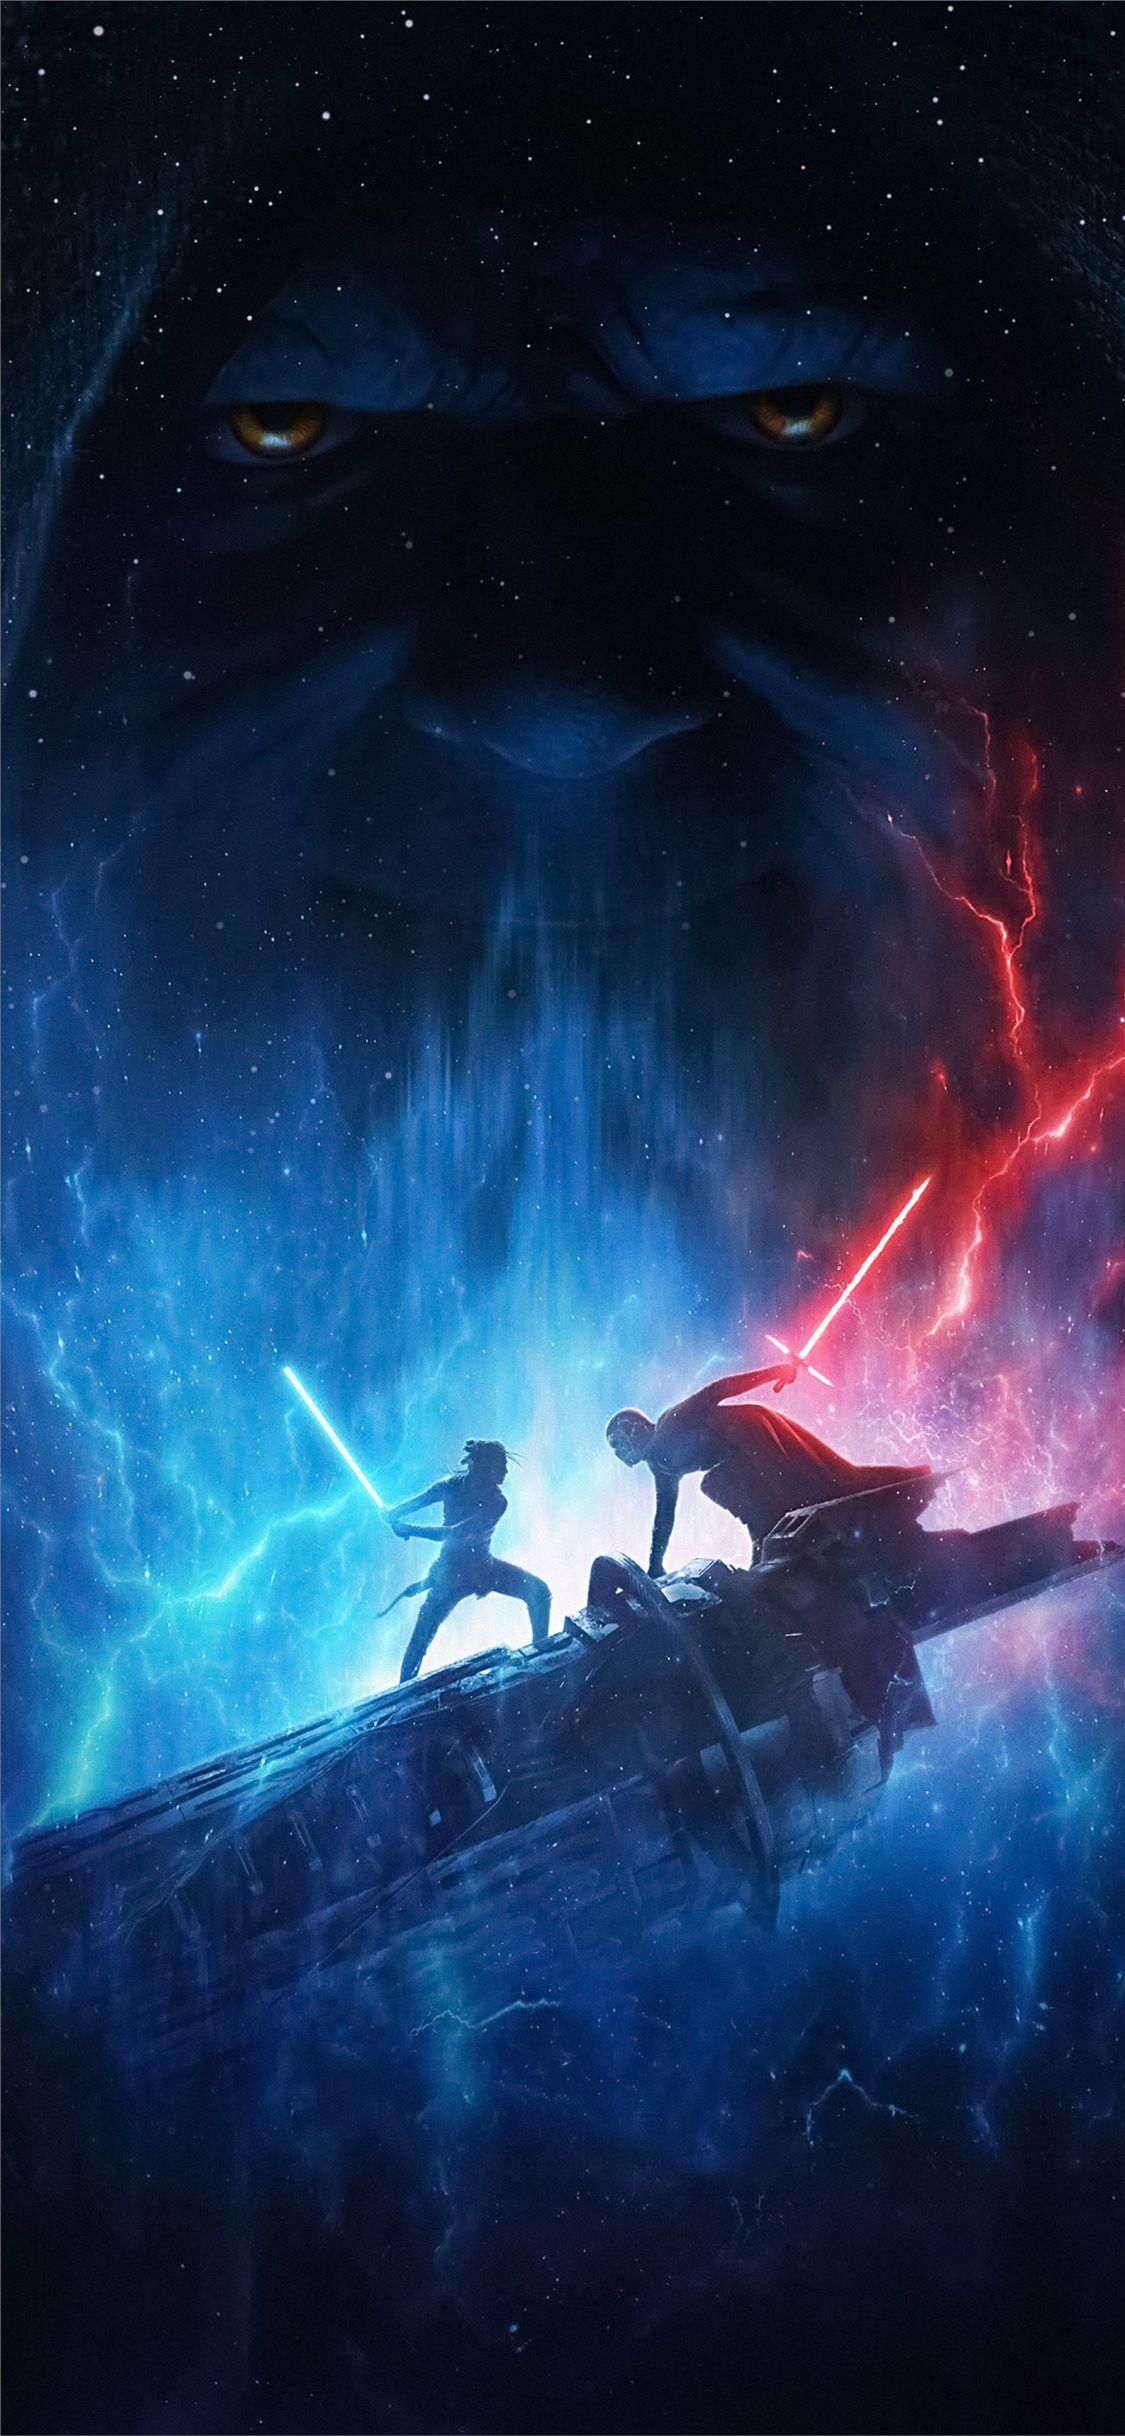 New Star Wars The Rise of Skywalker iPhone wallpaper